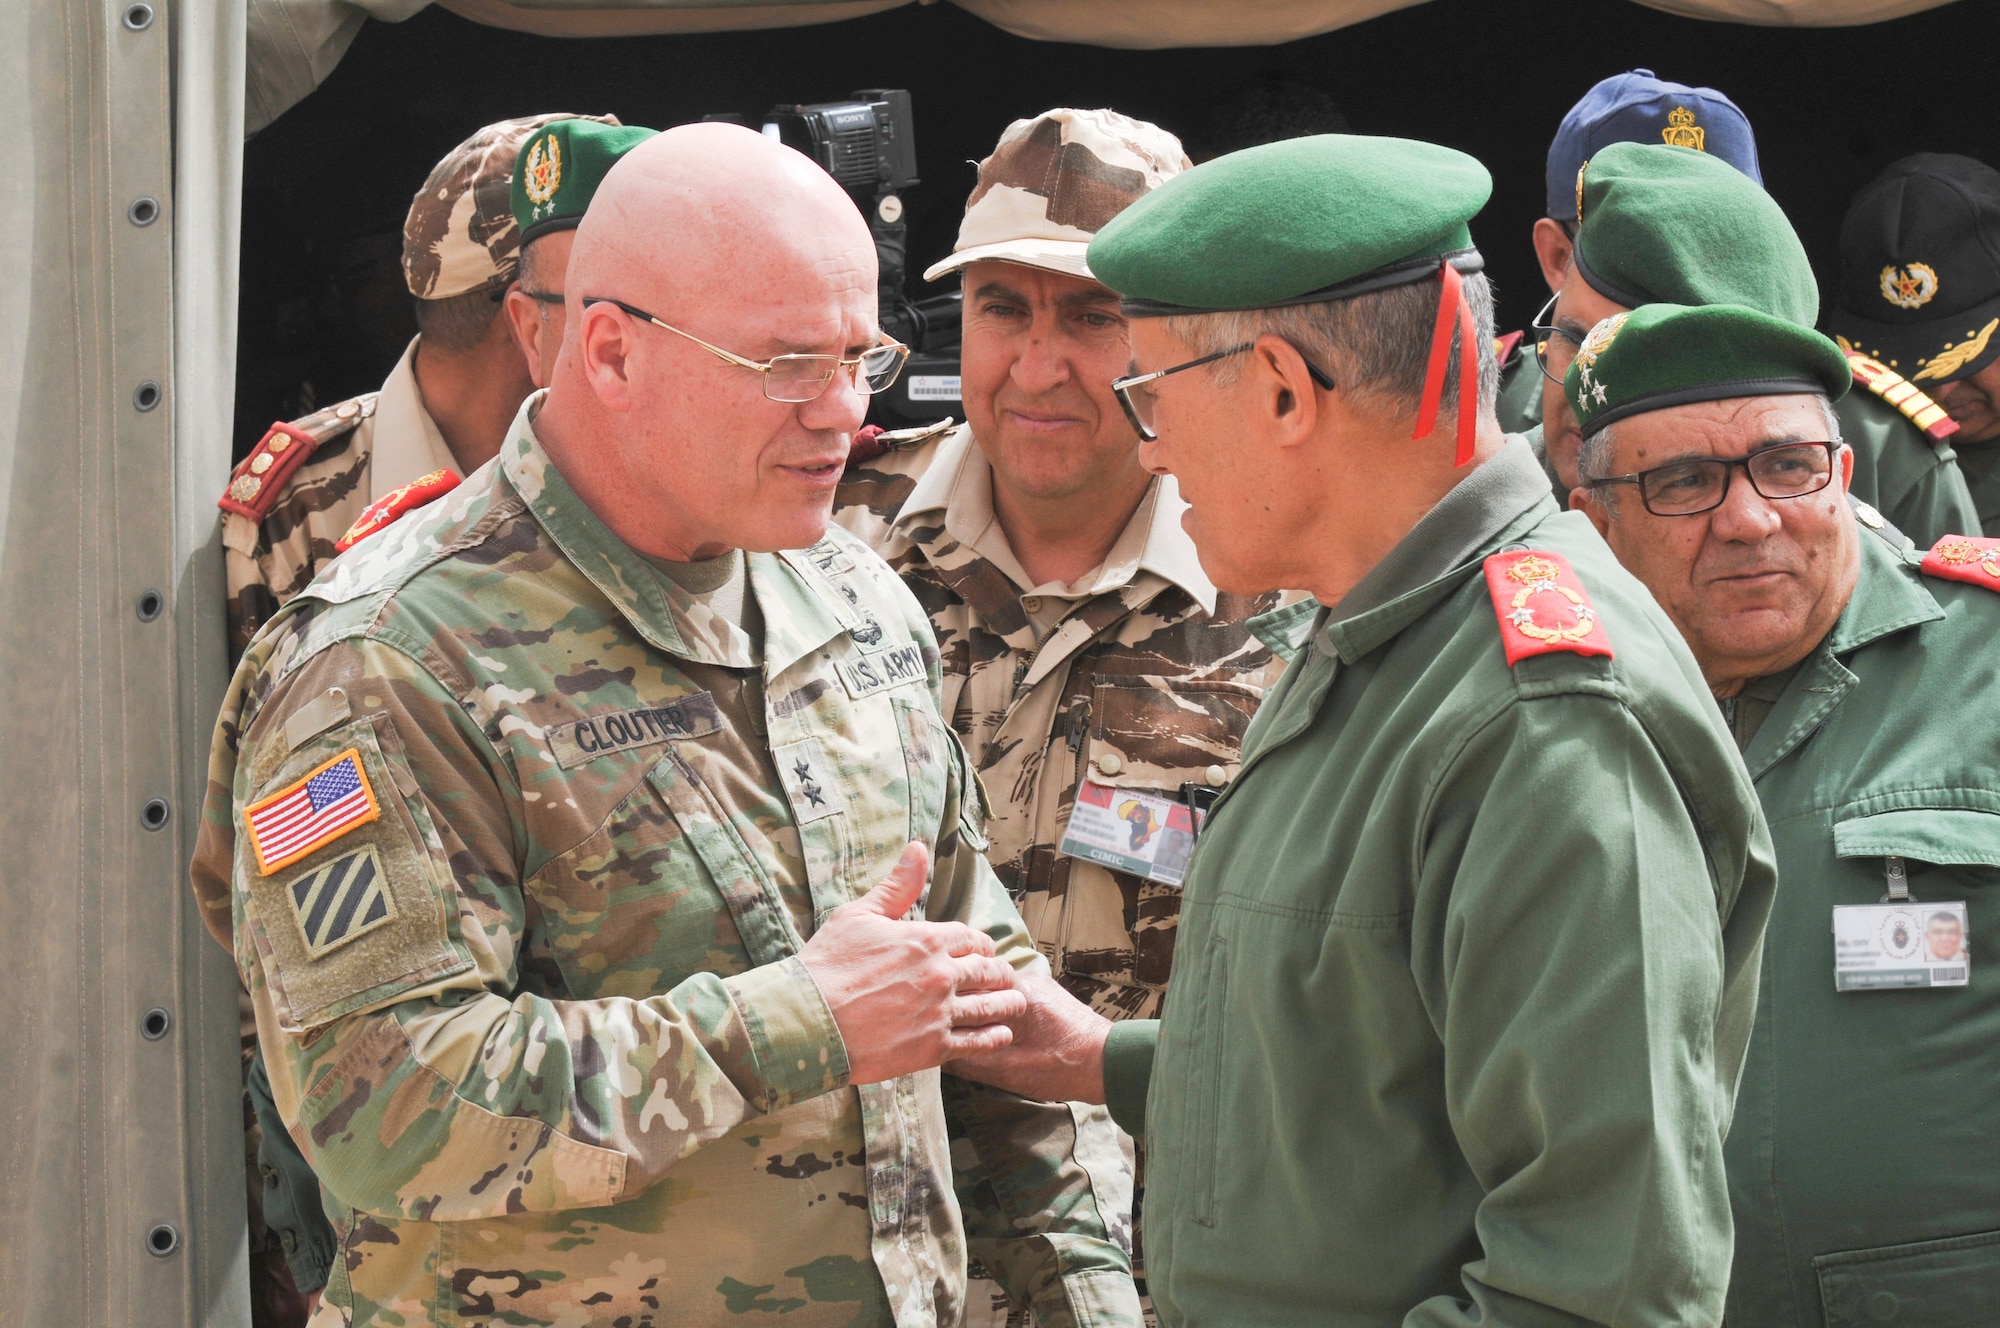 Maj. Gen. Roger L. Cloutier Jr., U.S. Africa Chief of Staff and other distinguished guests tour the field hospital in Tata during the humanitarian civic assistance component of exercise African Lion 2019 in Tata, Morocco, March 30, 2019. African Lion 2019 is a Chairman of the Joint Chiefs of Staff-sponsored, U.S. African Command-scheduled, U.S. Marine Corps Forces Europe and Africa-led, joint and combined exercise conducted in the Kingdom of Morocco. African Lion offers an opportunity for participation in a multinational exercise to enhance professional relationships and allow support for interoperability of forces.(U.S. AIr Force illustration)